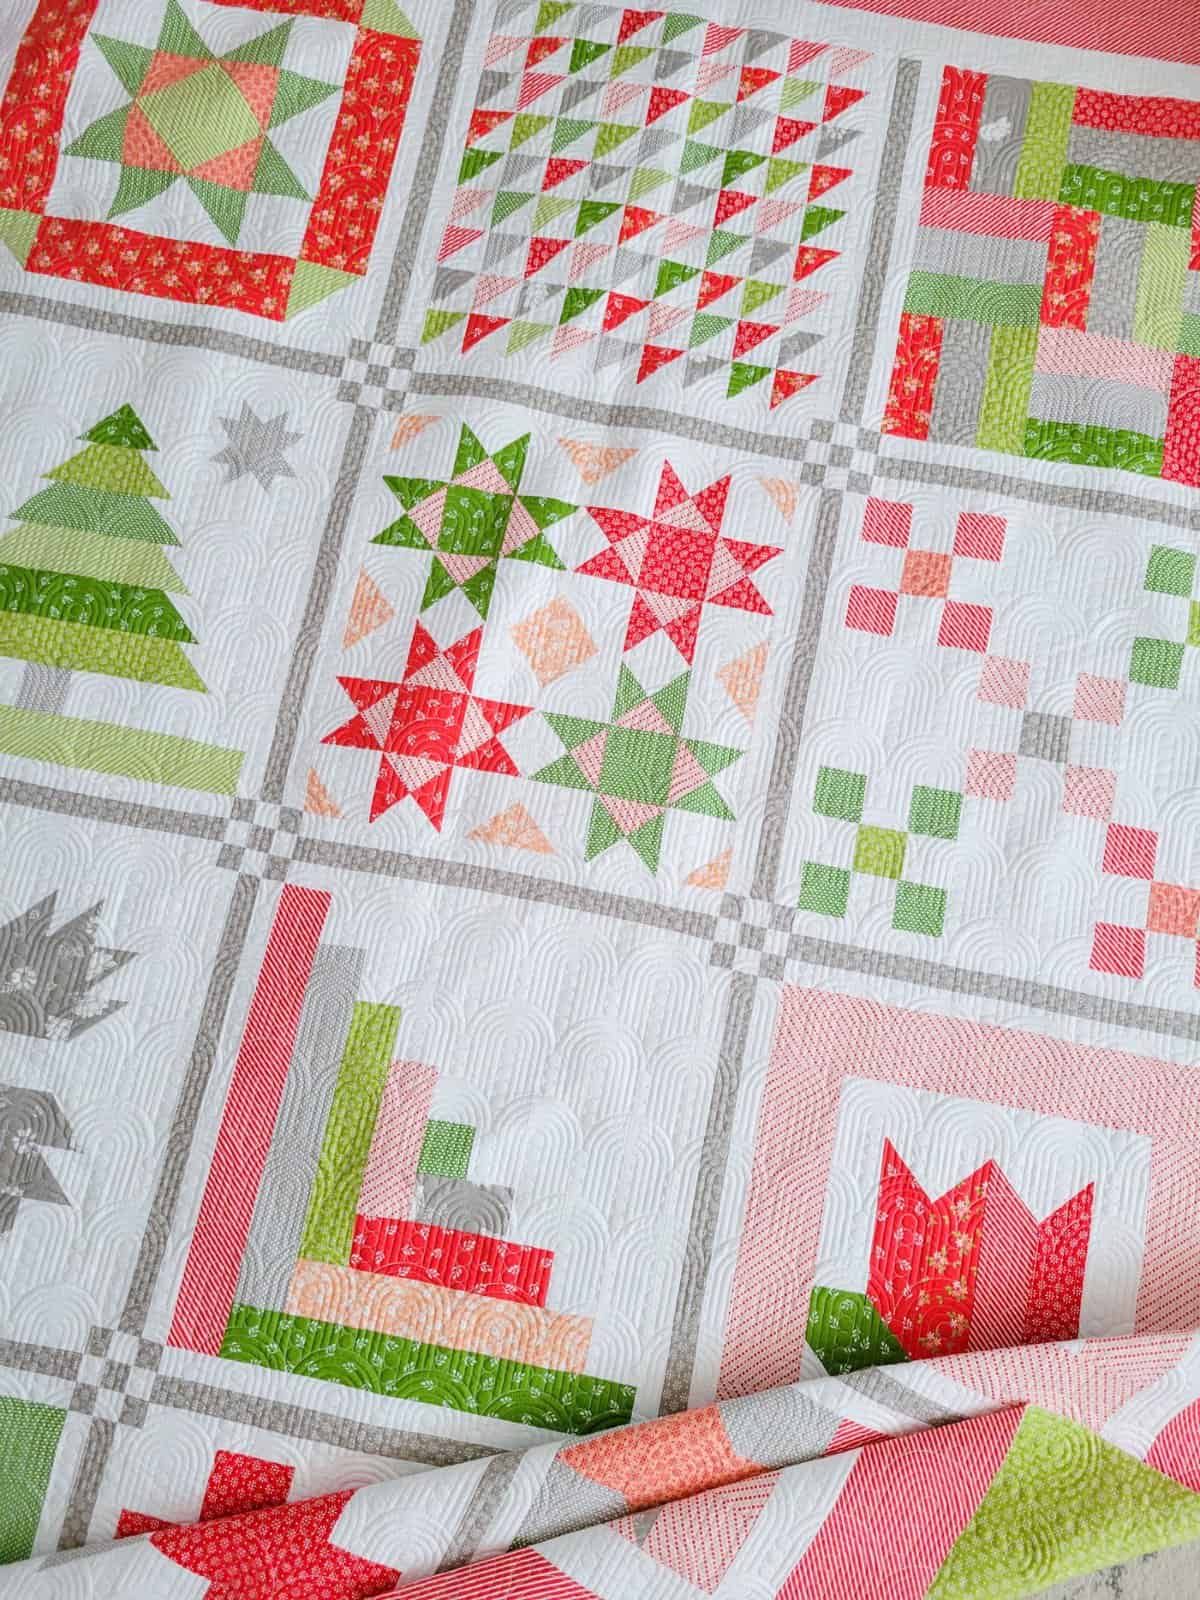 Home for the Holidays Sampler Quilt featured by Top US Quilt Blog, A Quilting Life